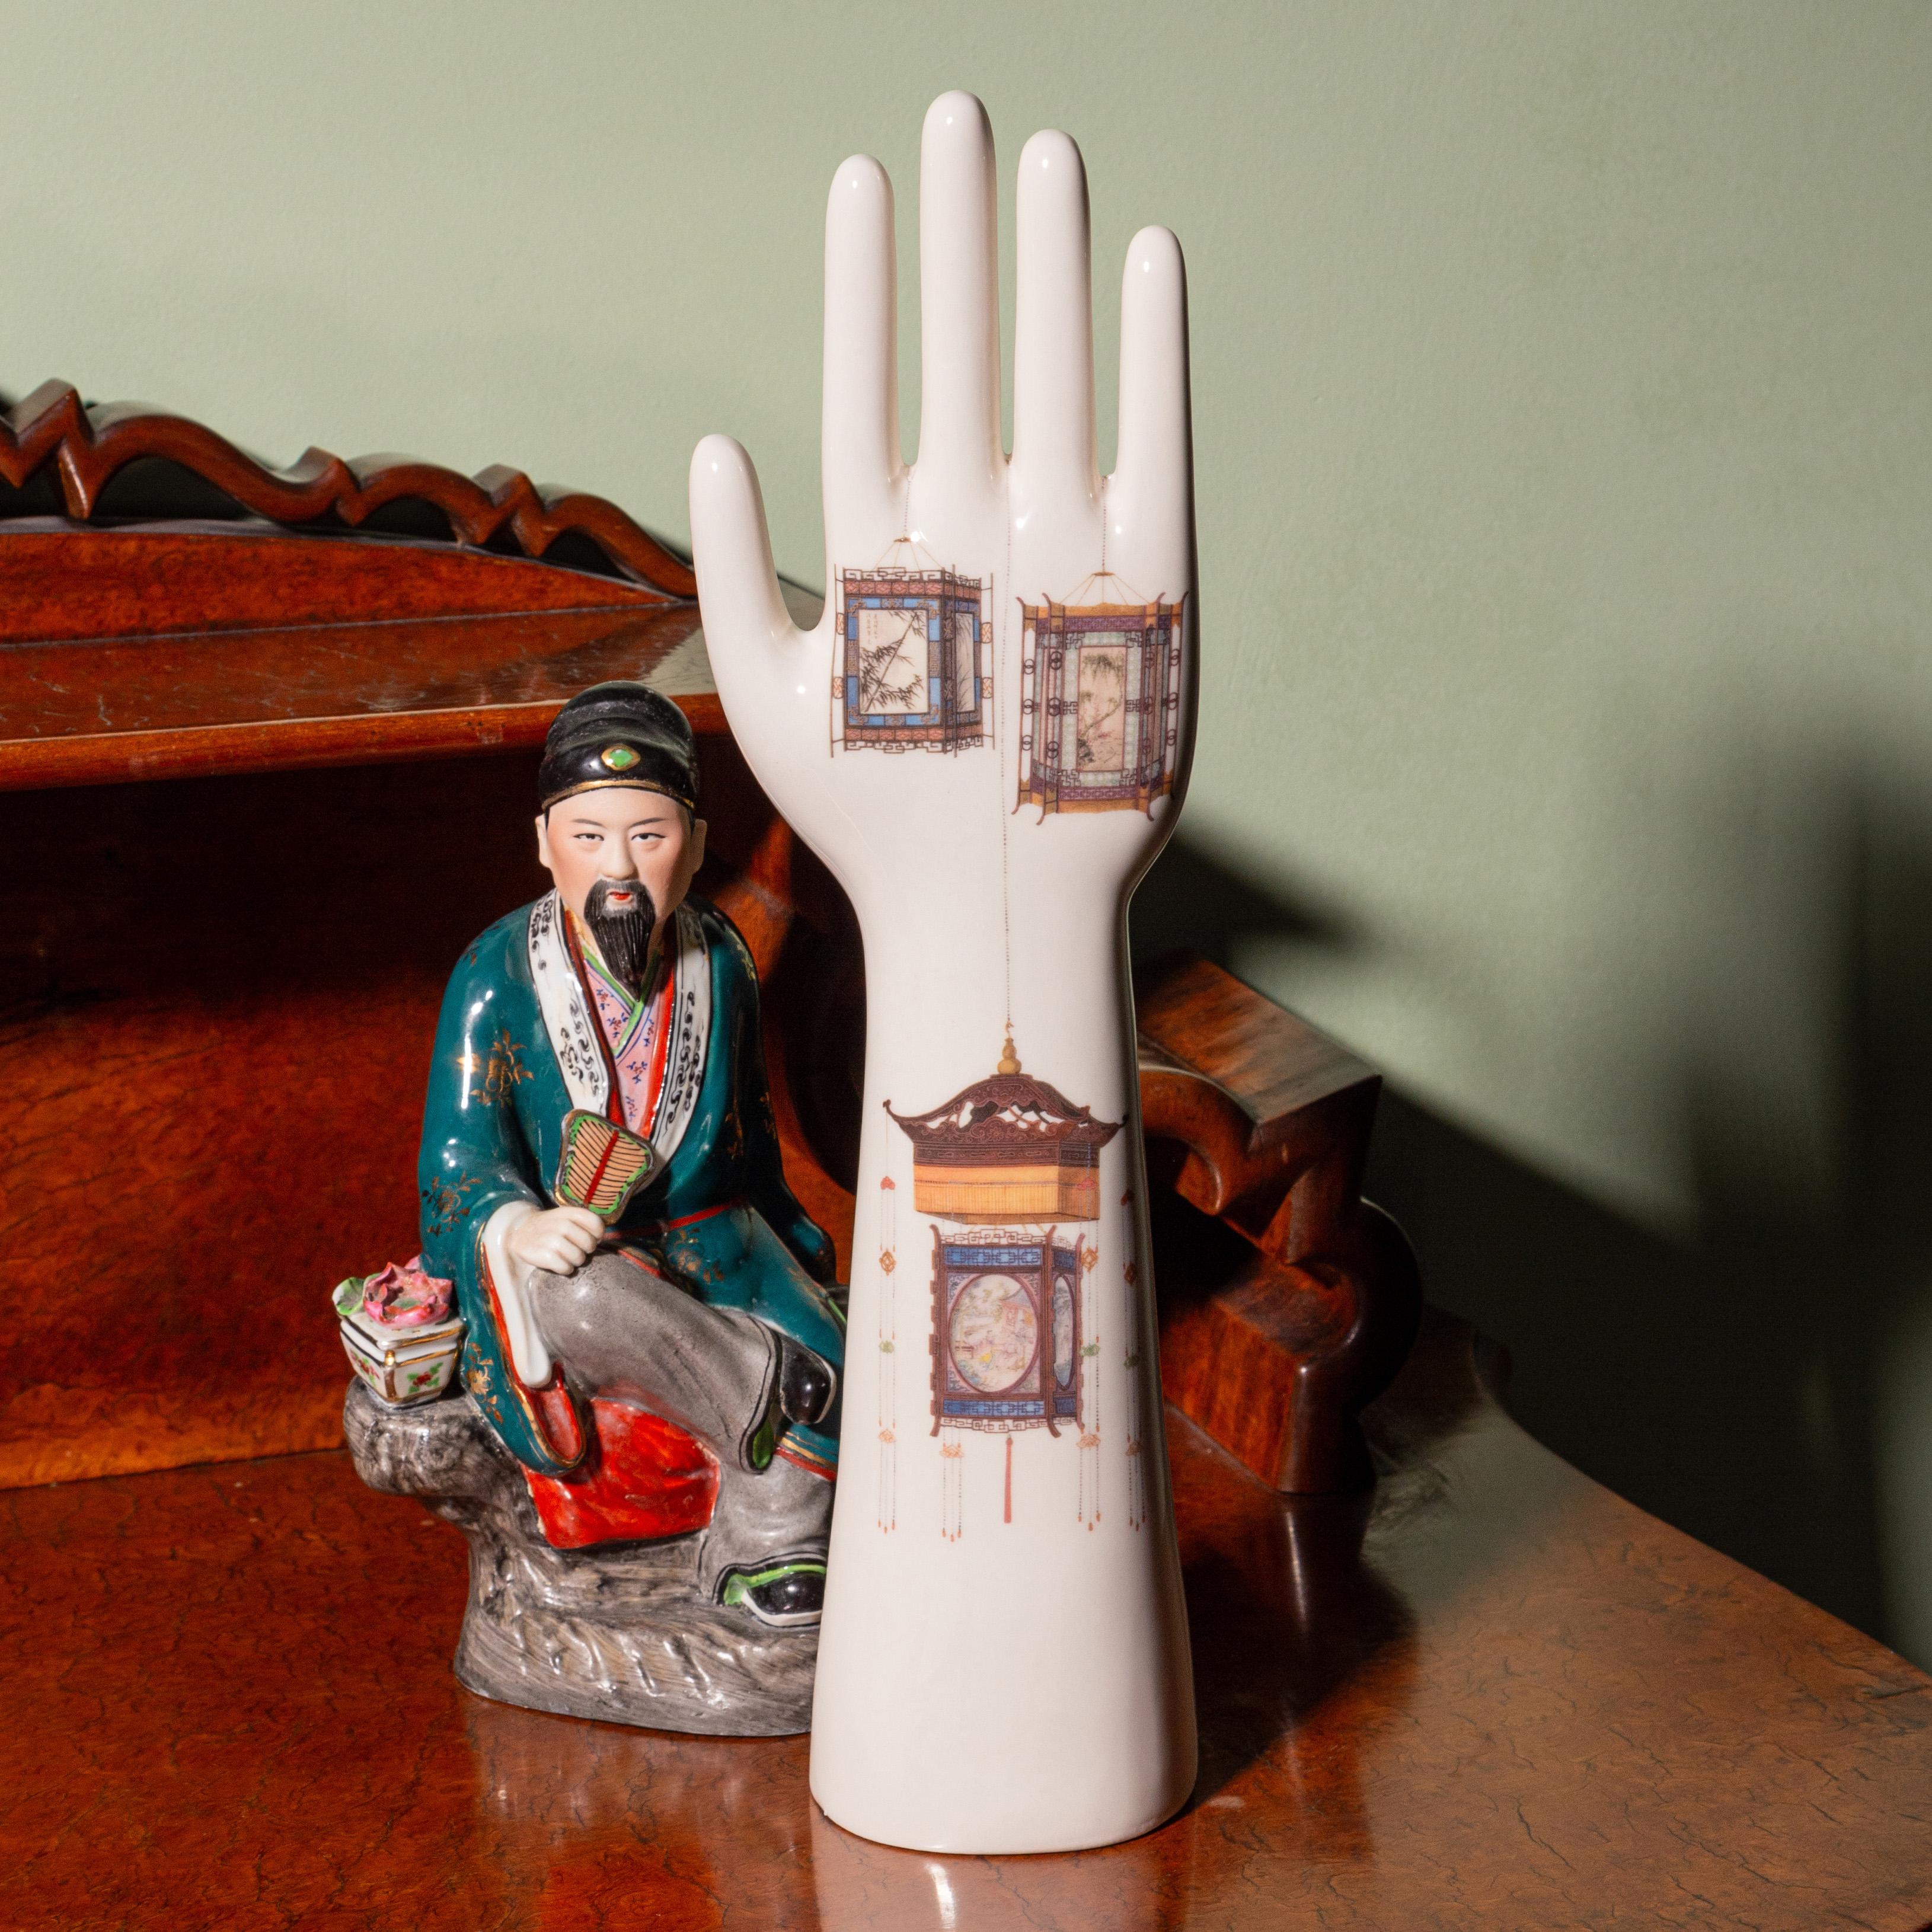 Anatomica, Porcelain Hand with Chinese Lanterns Decoration by Vito Nesta For Sale 1